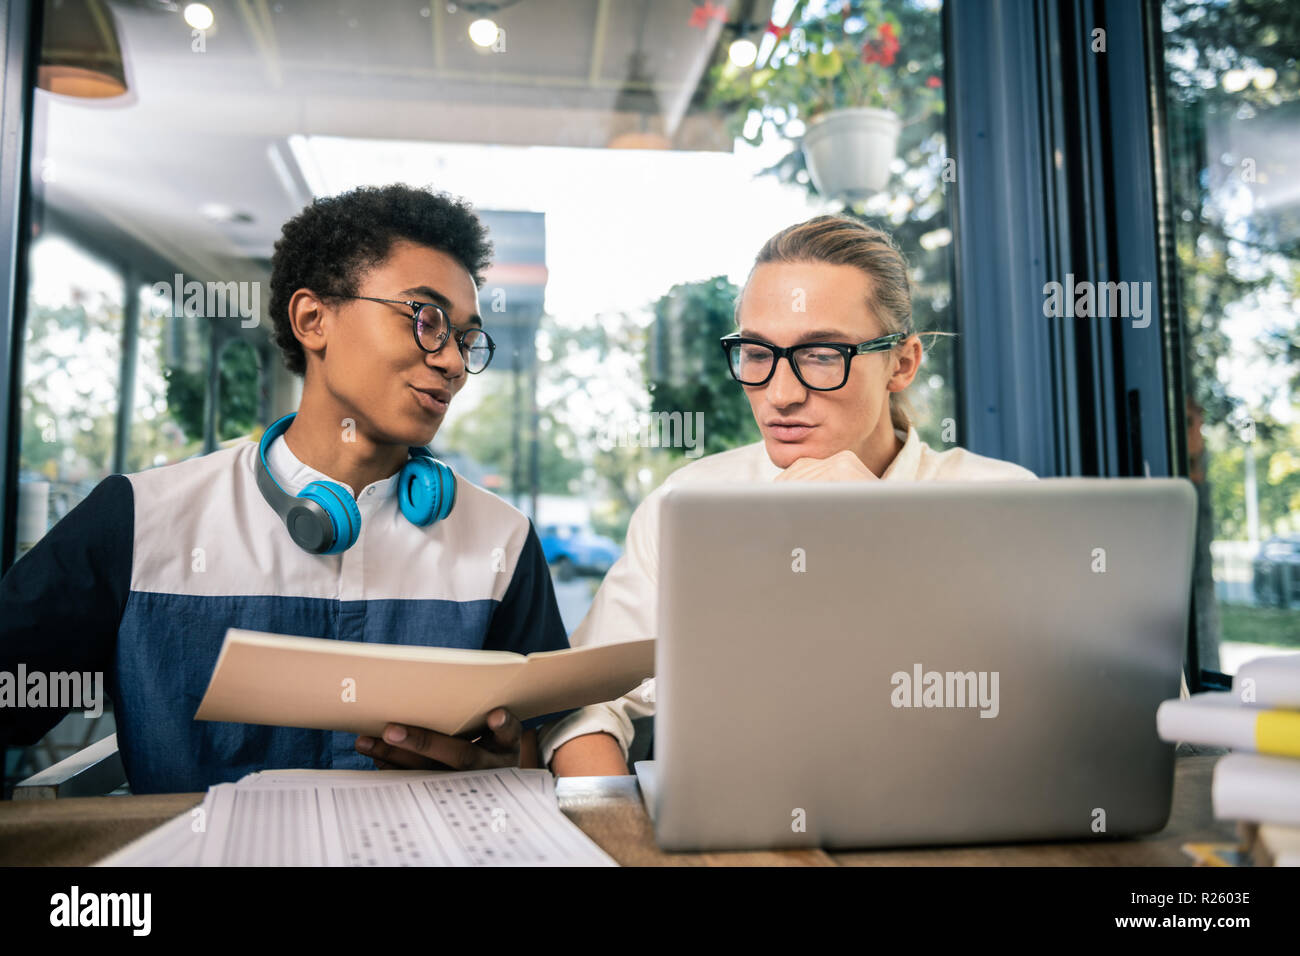 Serious young man helping his friend with exam preparation Stock Photo